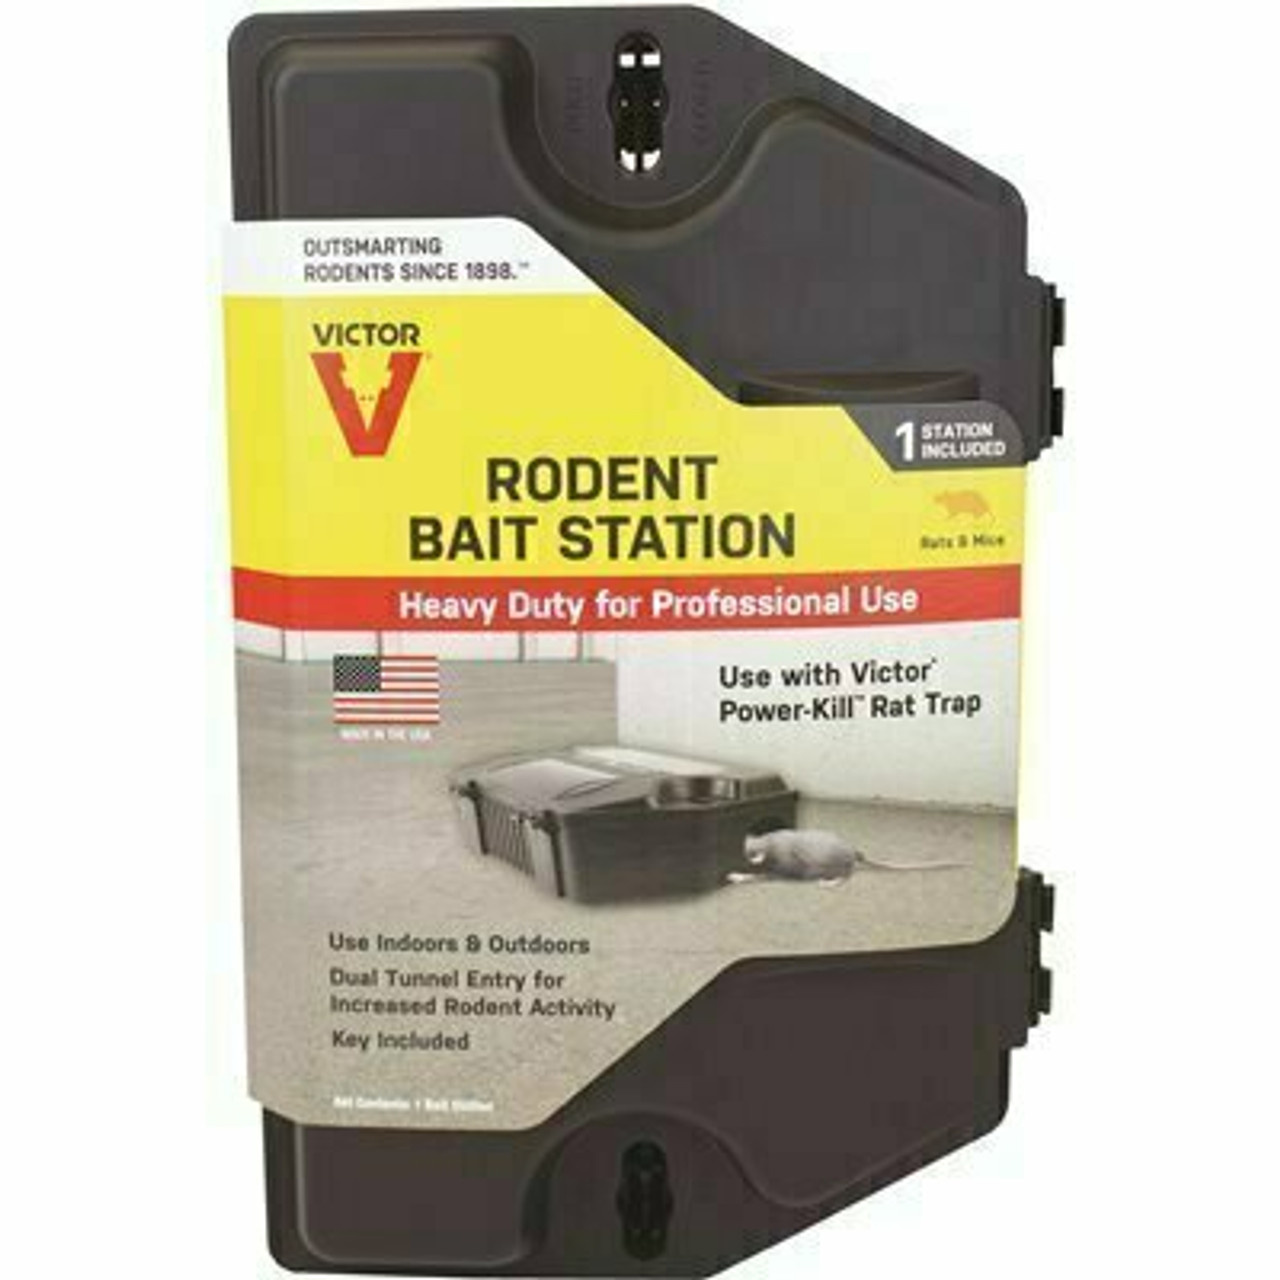 Victor Rodent Bait Station